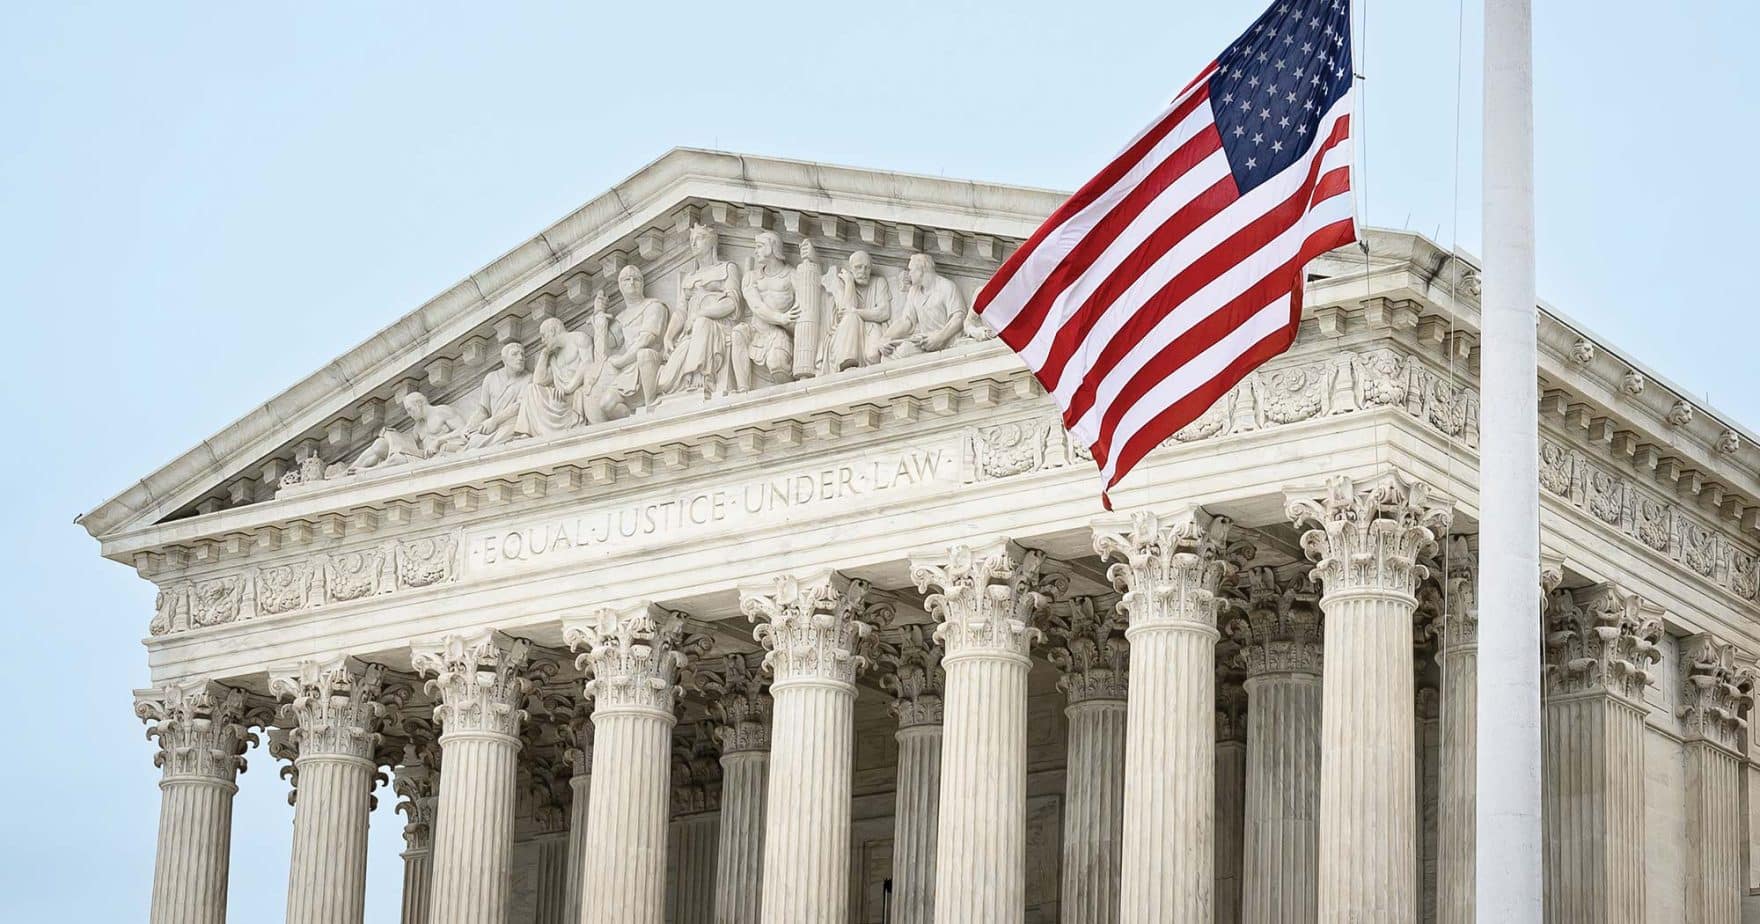 The American flag in front of the U.S. Supreme Court: Learn about the Robertson Center for Constitutional Law.